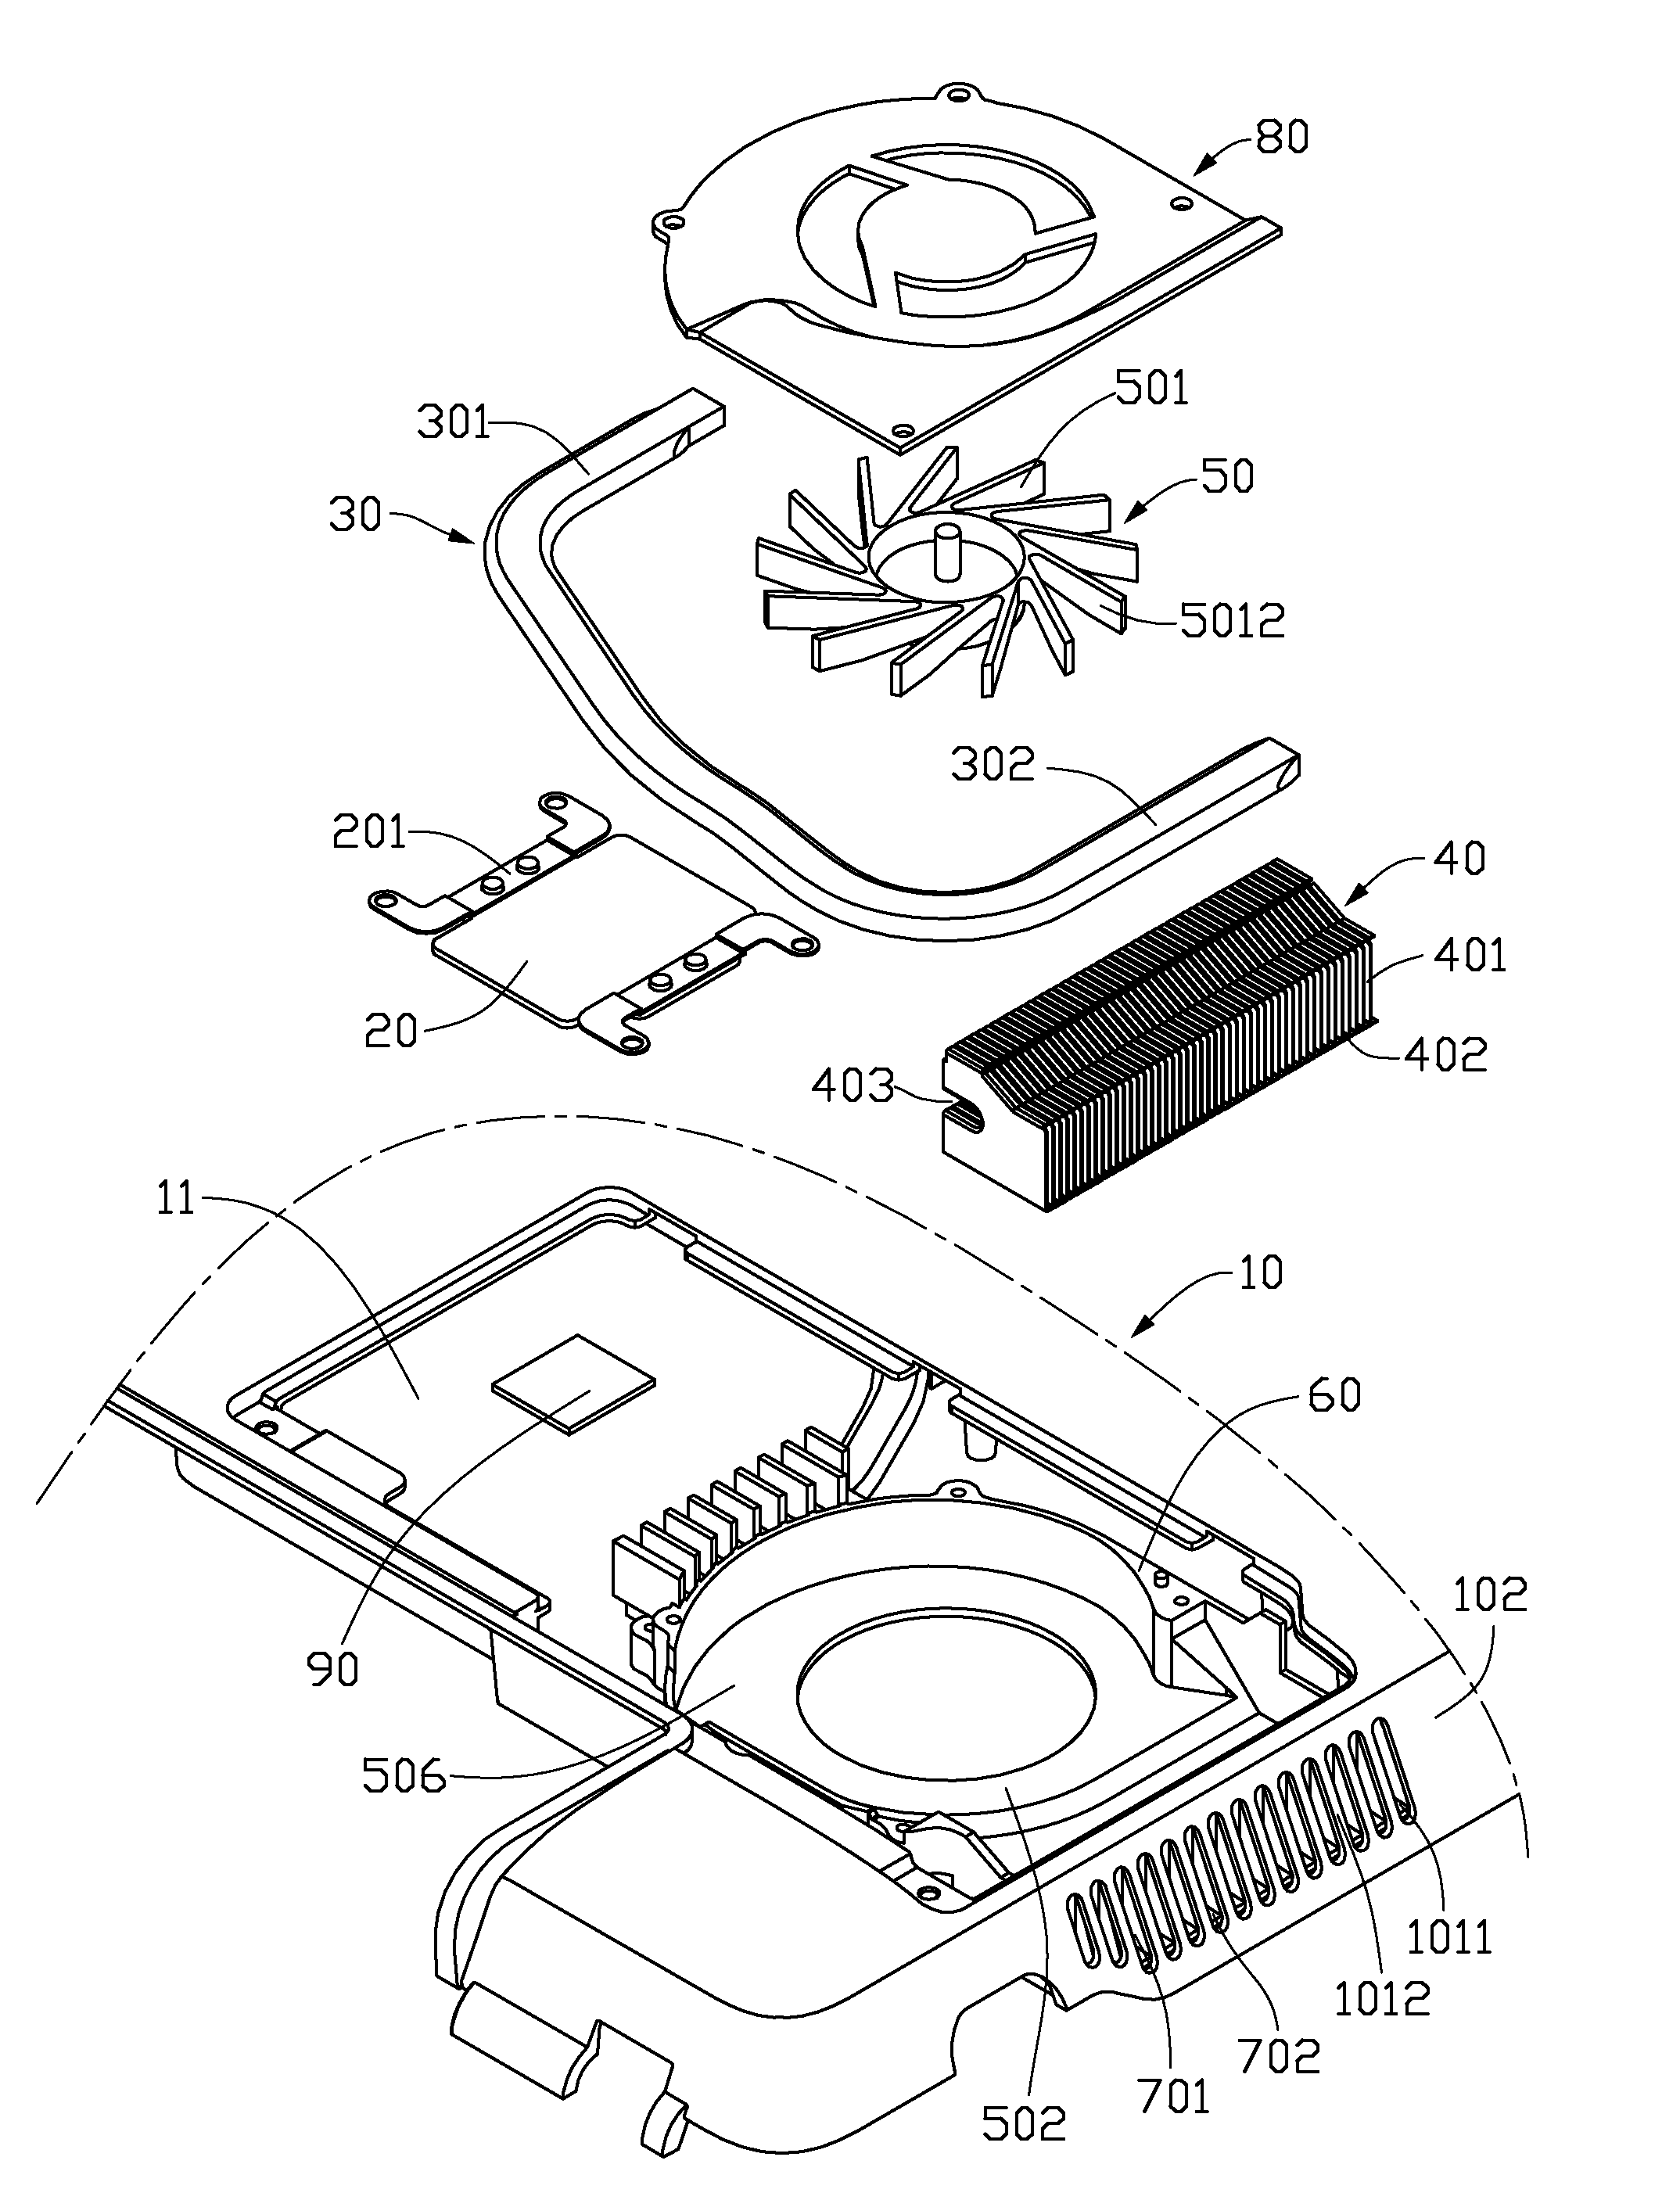 Thermal module and electronic assembly incorporating the same